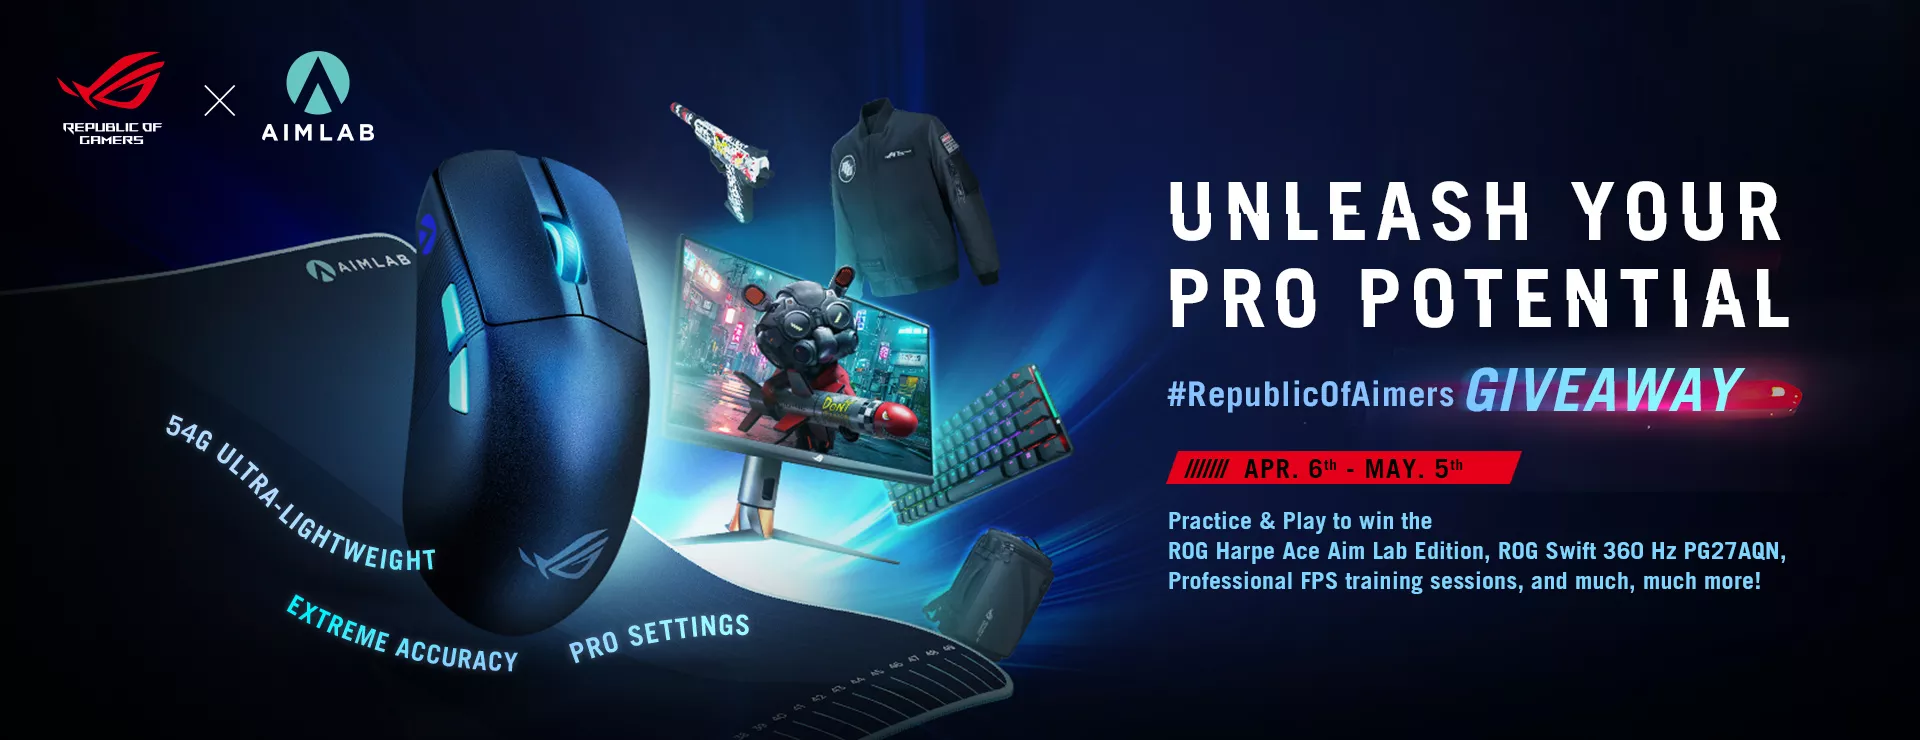 The Republic of Aimers Giveaway Event banner with an array of prizes that players could potentially win if they enter the campaign, which include the ROG Harpe Ace Aim Lab Edition mouse, Training courses from professional coaches at Aim Lab, and a ROG Swift 360 Hz PG27AQN gaming monitor. Click on the banner, and visit the campaign site to learn more!